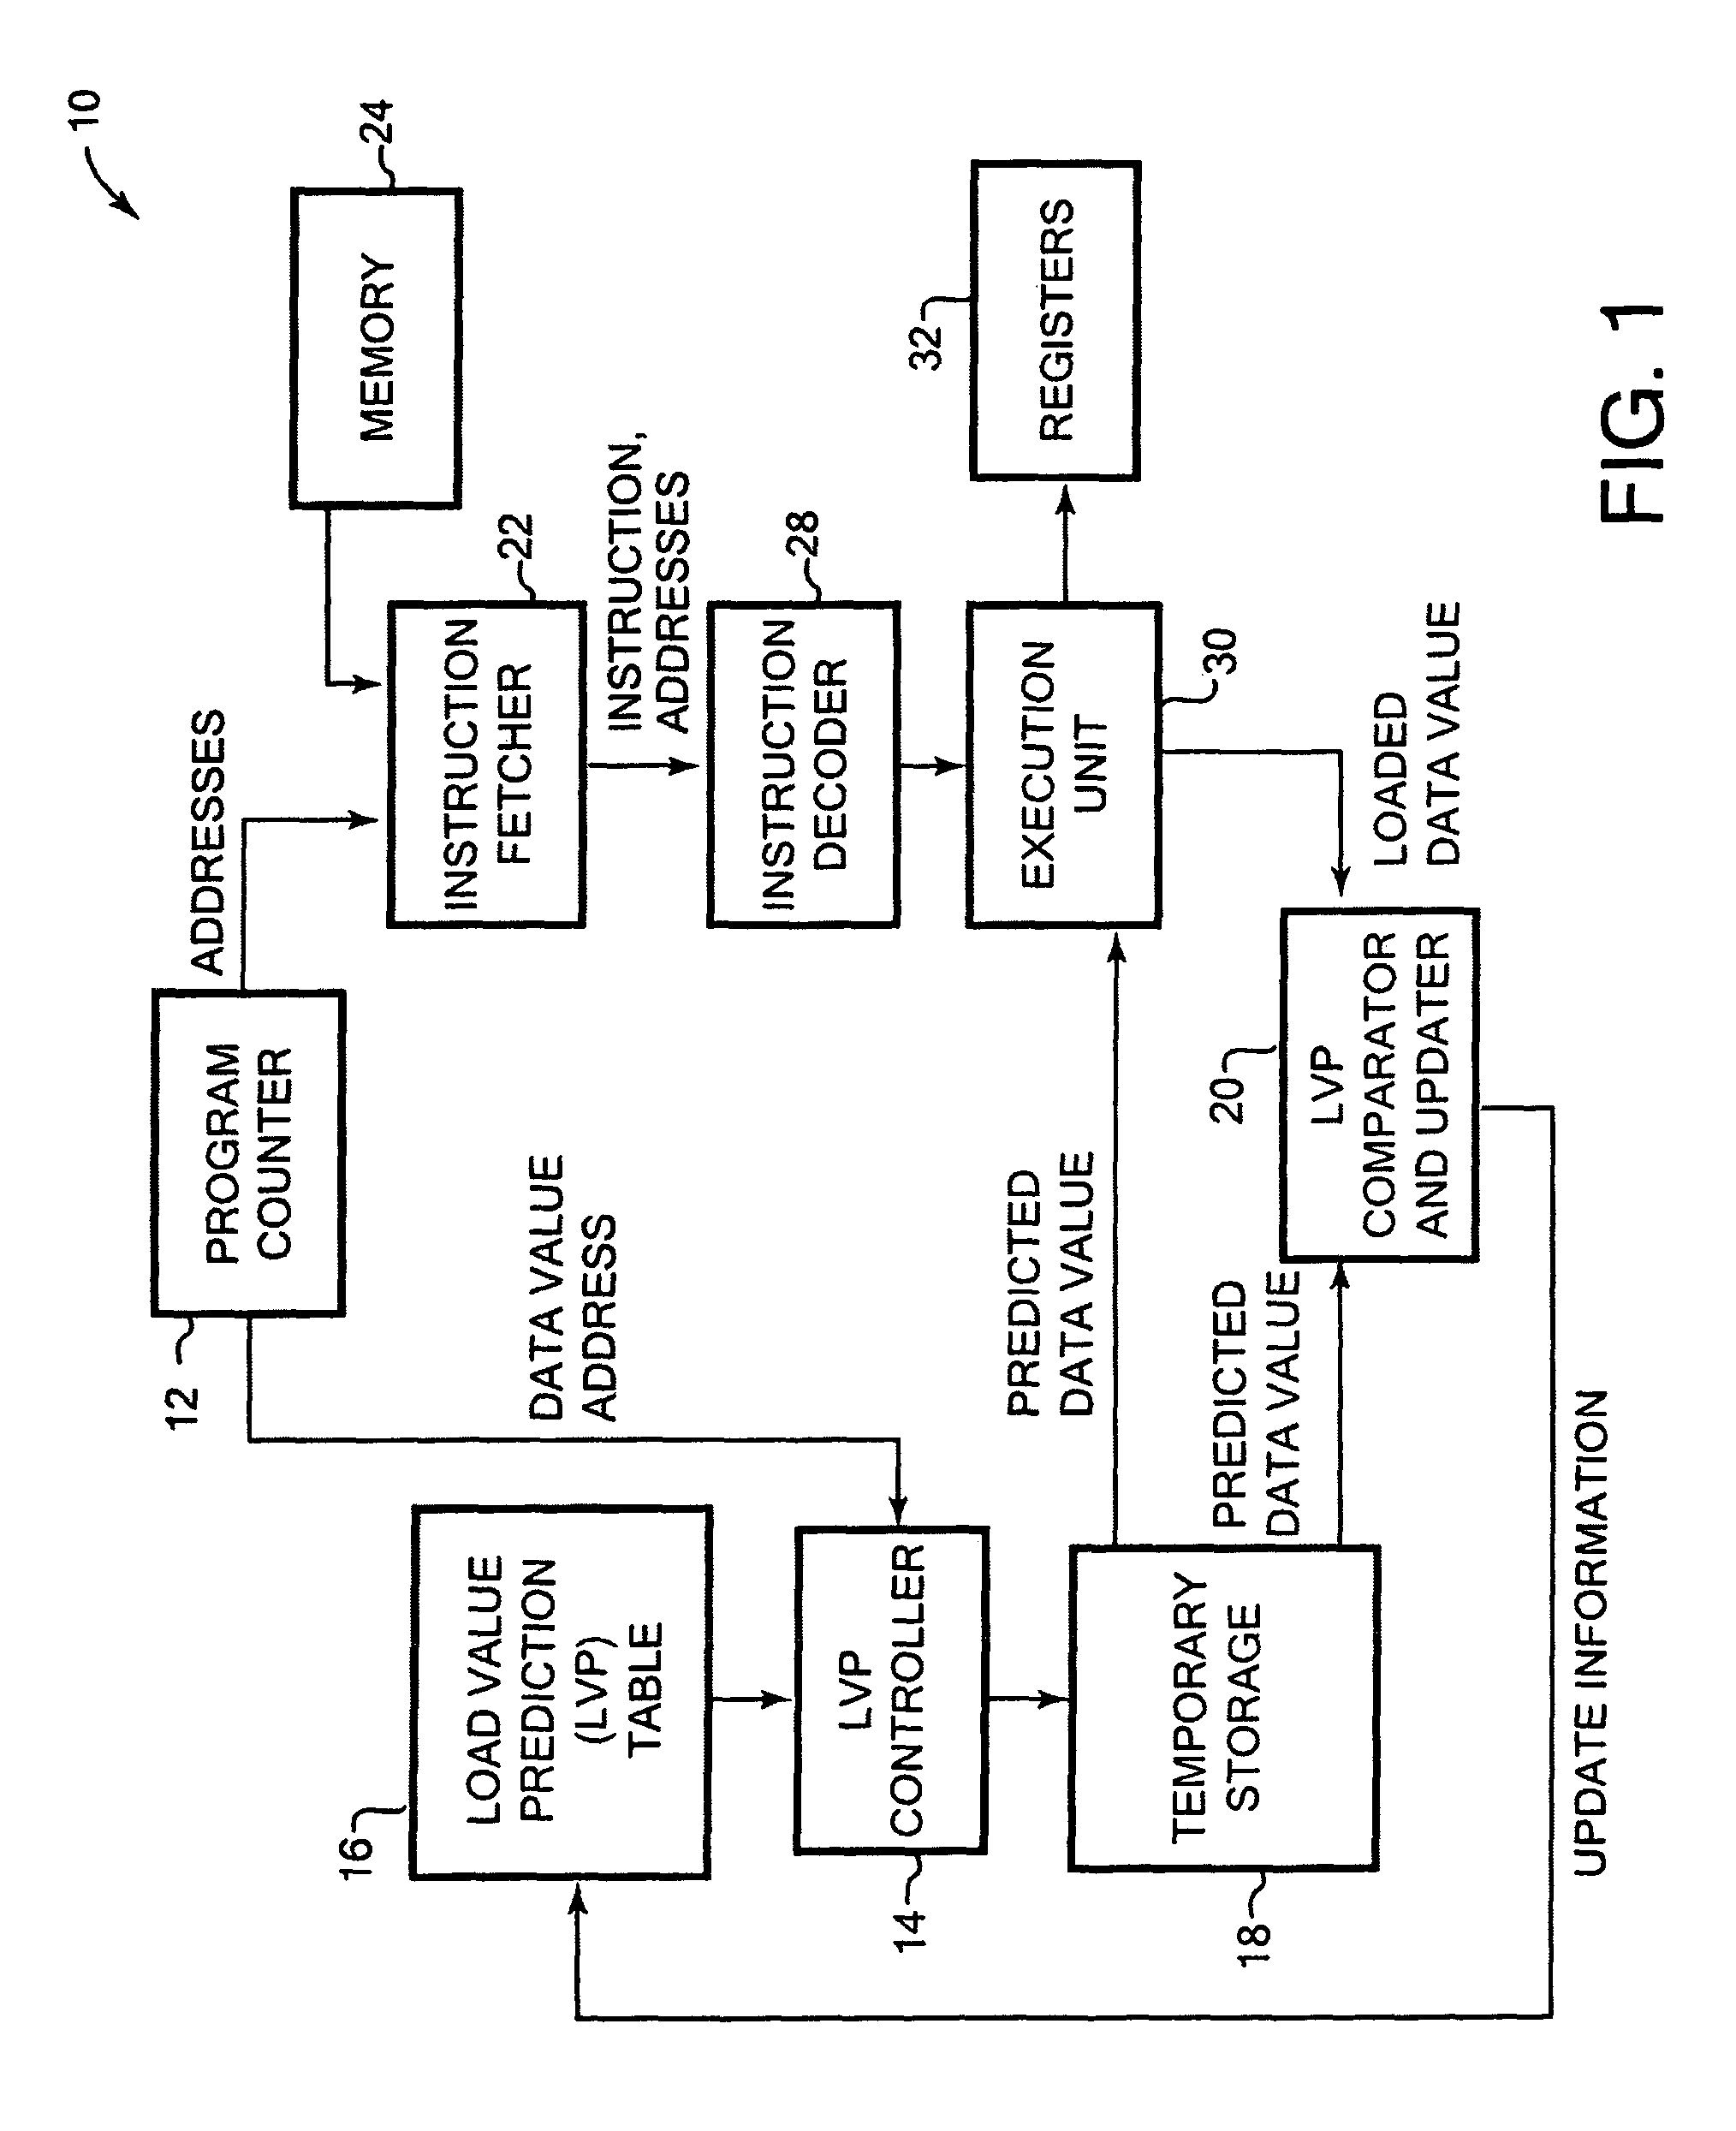 Prediction of data values read from memory by a microprocessor using the storage destination of a load operation